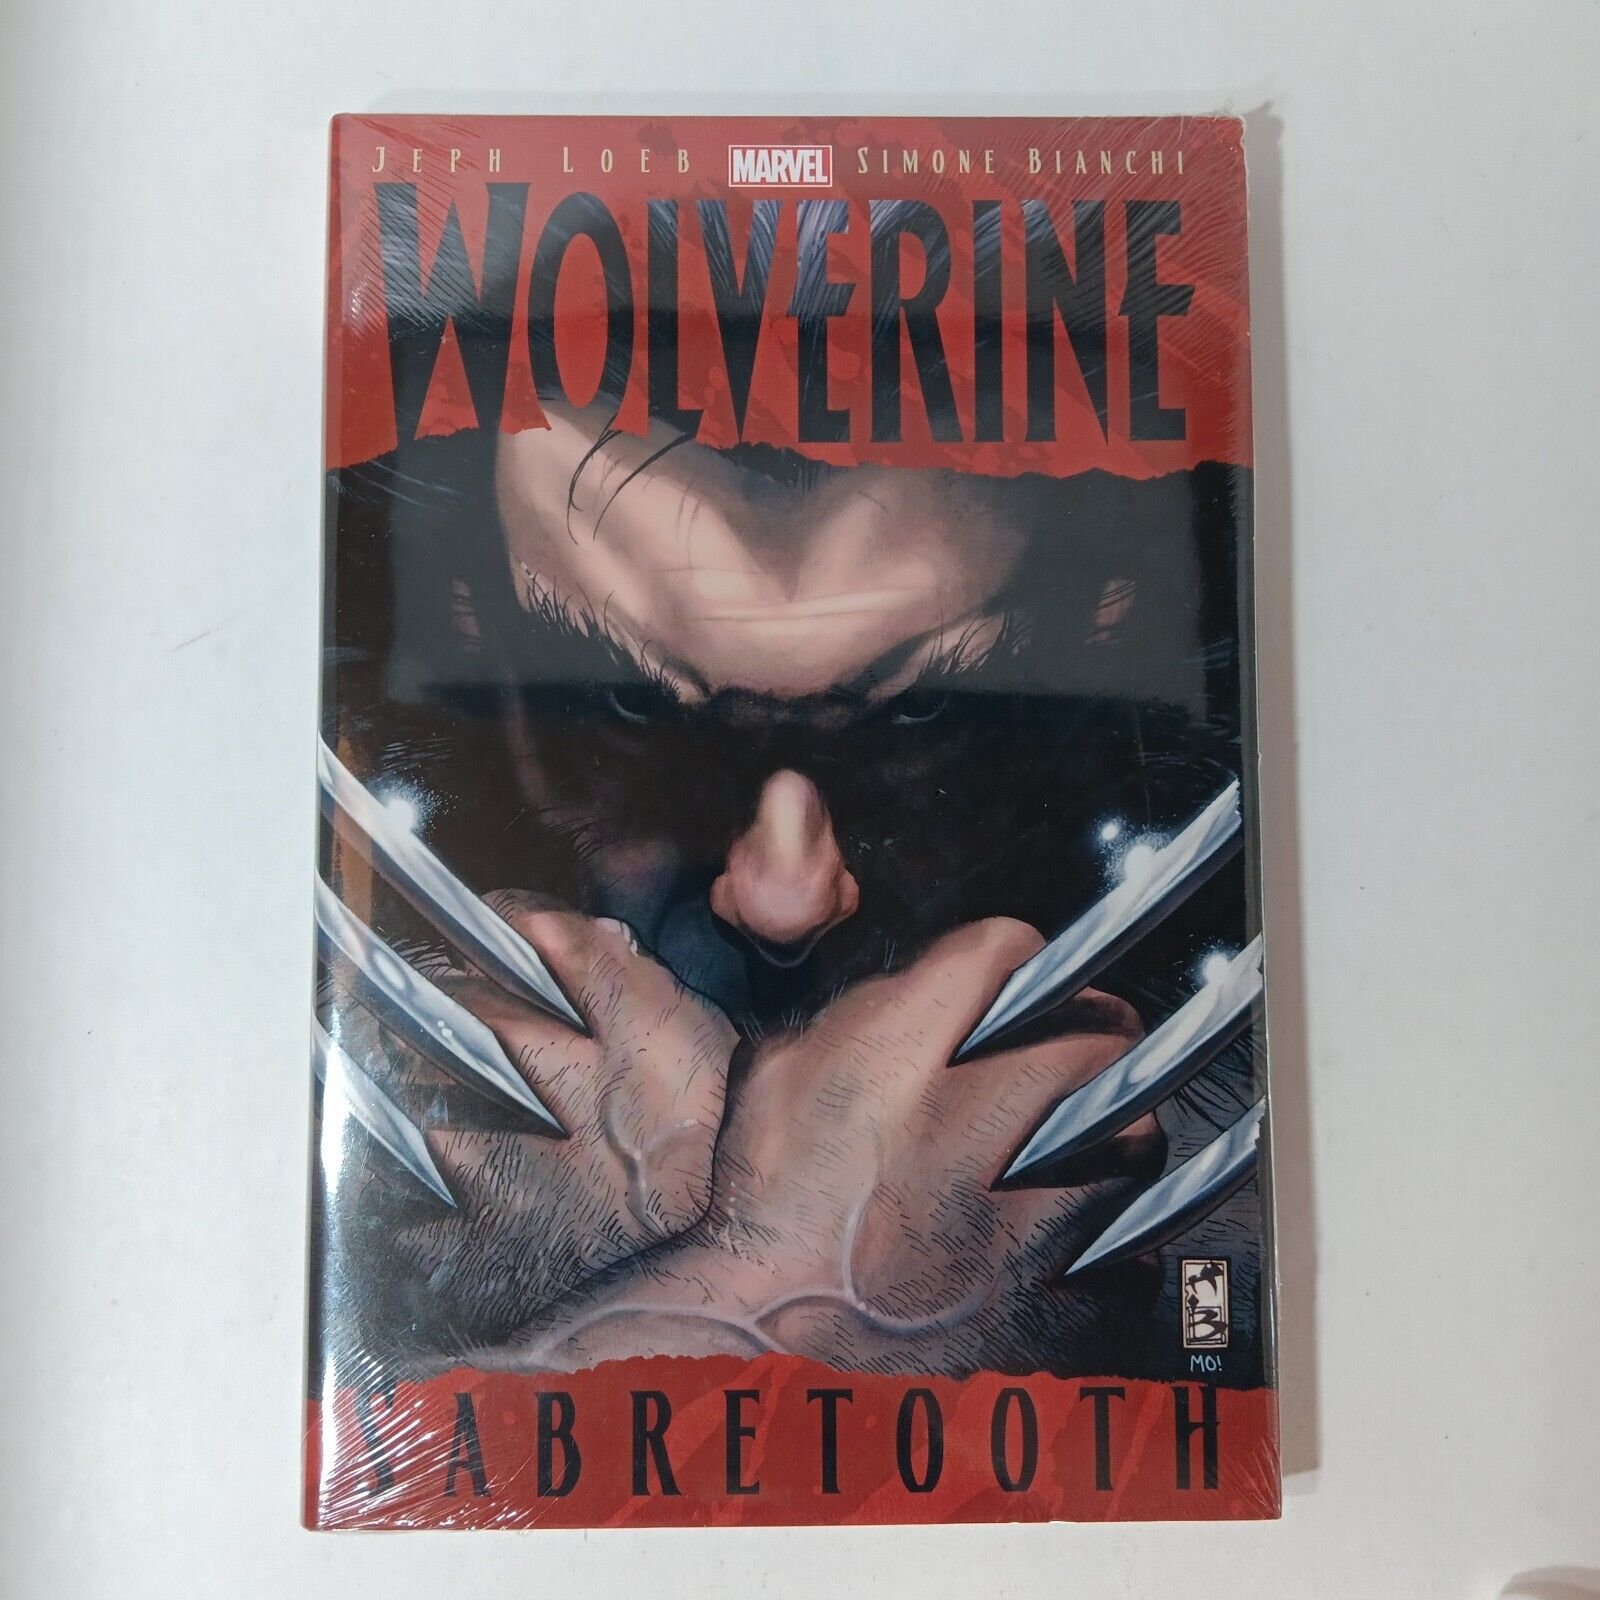 Wolverine: Sabretooth, MARVEL Comics Hardcover, Issues #50-55 and #310-313, 2013